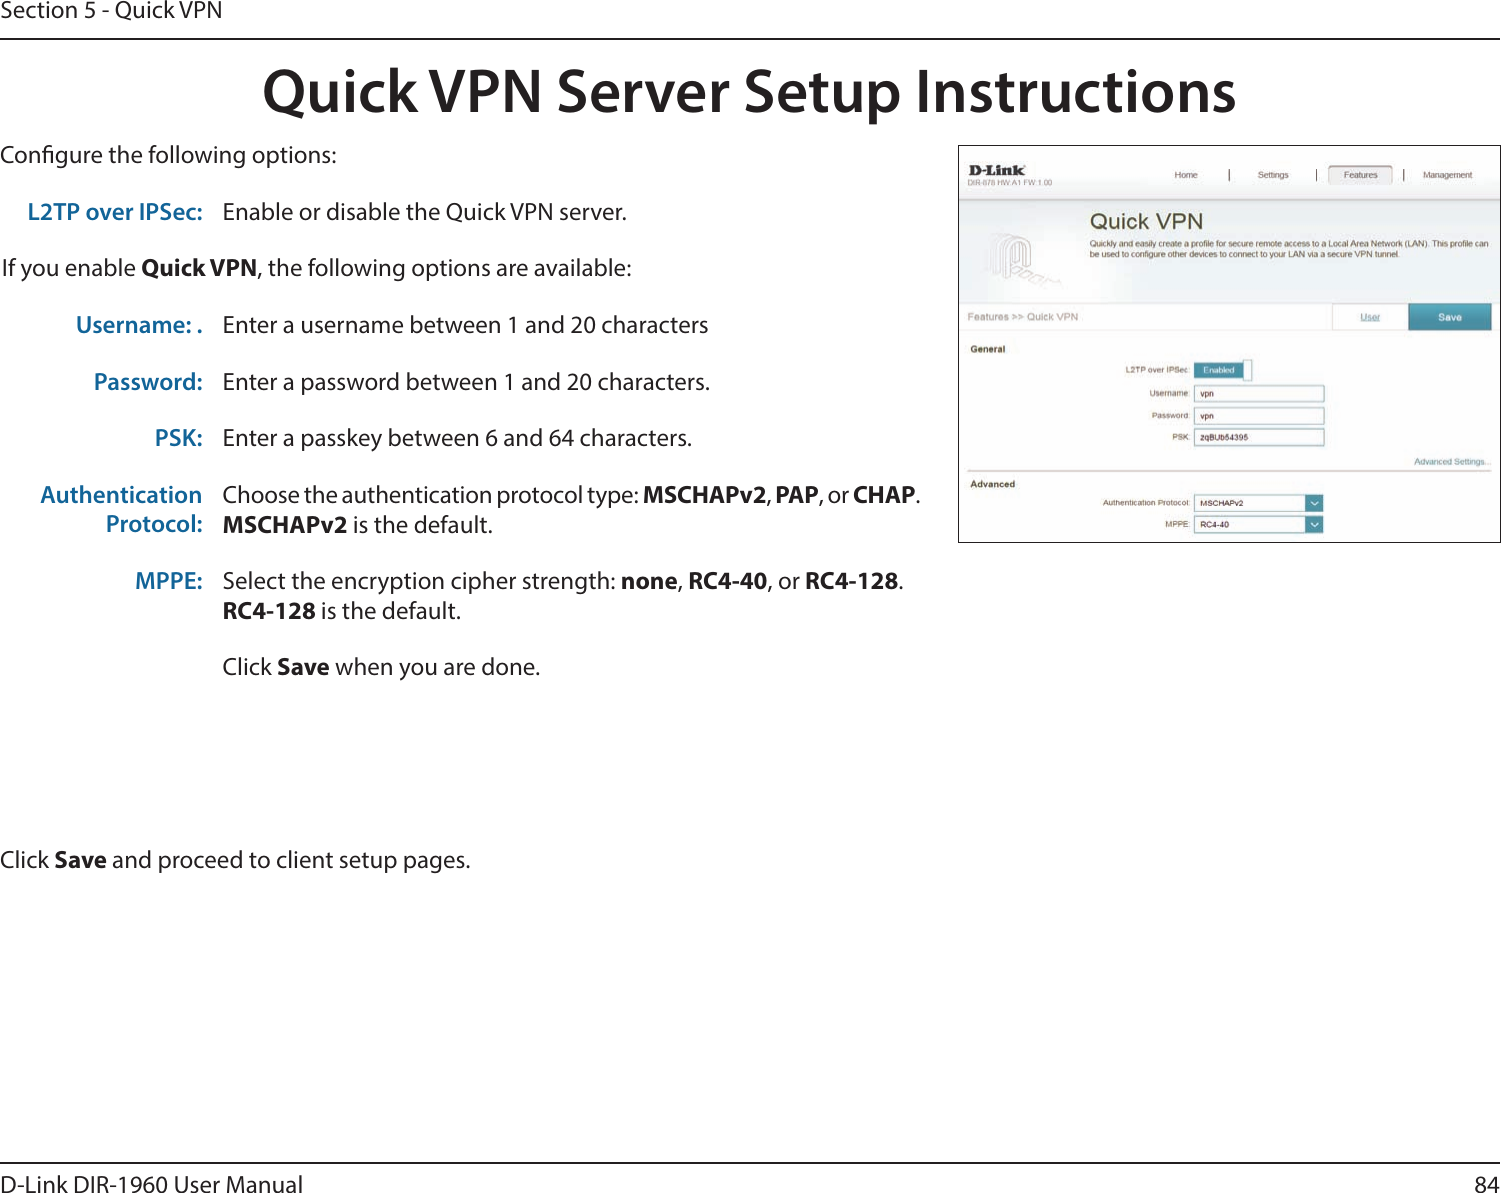 84D-Link DIR-1960 User ManualSection 5 - Quick VPNQuick VPN Server Setup InstructionsCongure the following options:Click Save and proceed to client setup pages.L2TP over IPSec: Enable or disable the Quick VPN server.If you enable Quick VPN, the following options are available:Username: . Enter a username between 1 and 20 charactersPassword: Enter a password between 1 and 20 characters.PSK: Enter a passkey between 6 and 64 characters.AuthenticationProtocol:Choose the authentication protocol type: MSCHAPv2, PAP, or CHAP.MSCHAPv2 is the default.MPPE: Select the encryption cipher strength: none, RC4-40, or RC4-128.RC4-128 is the default.Click Save when you are done.